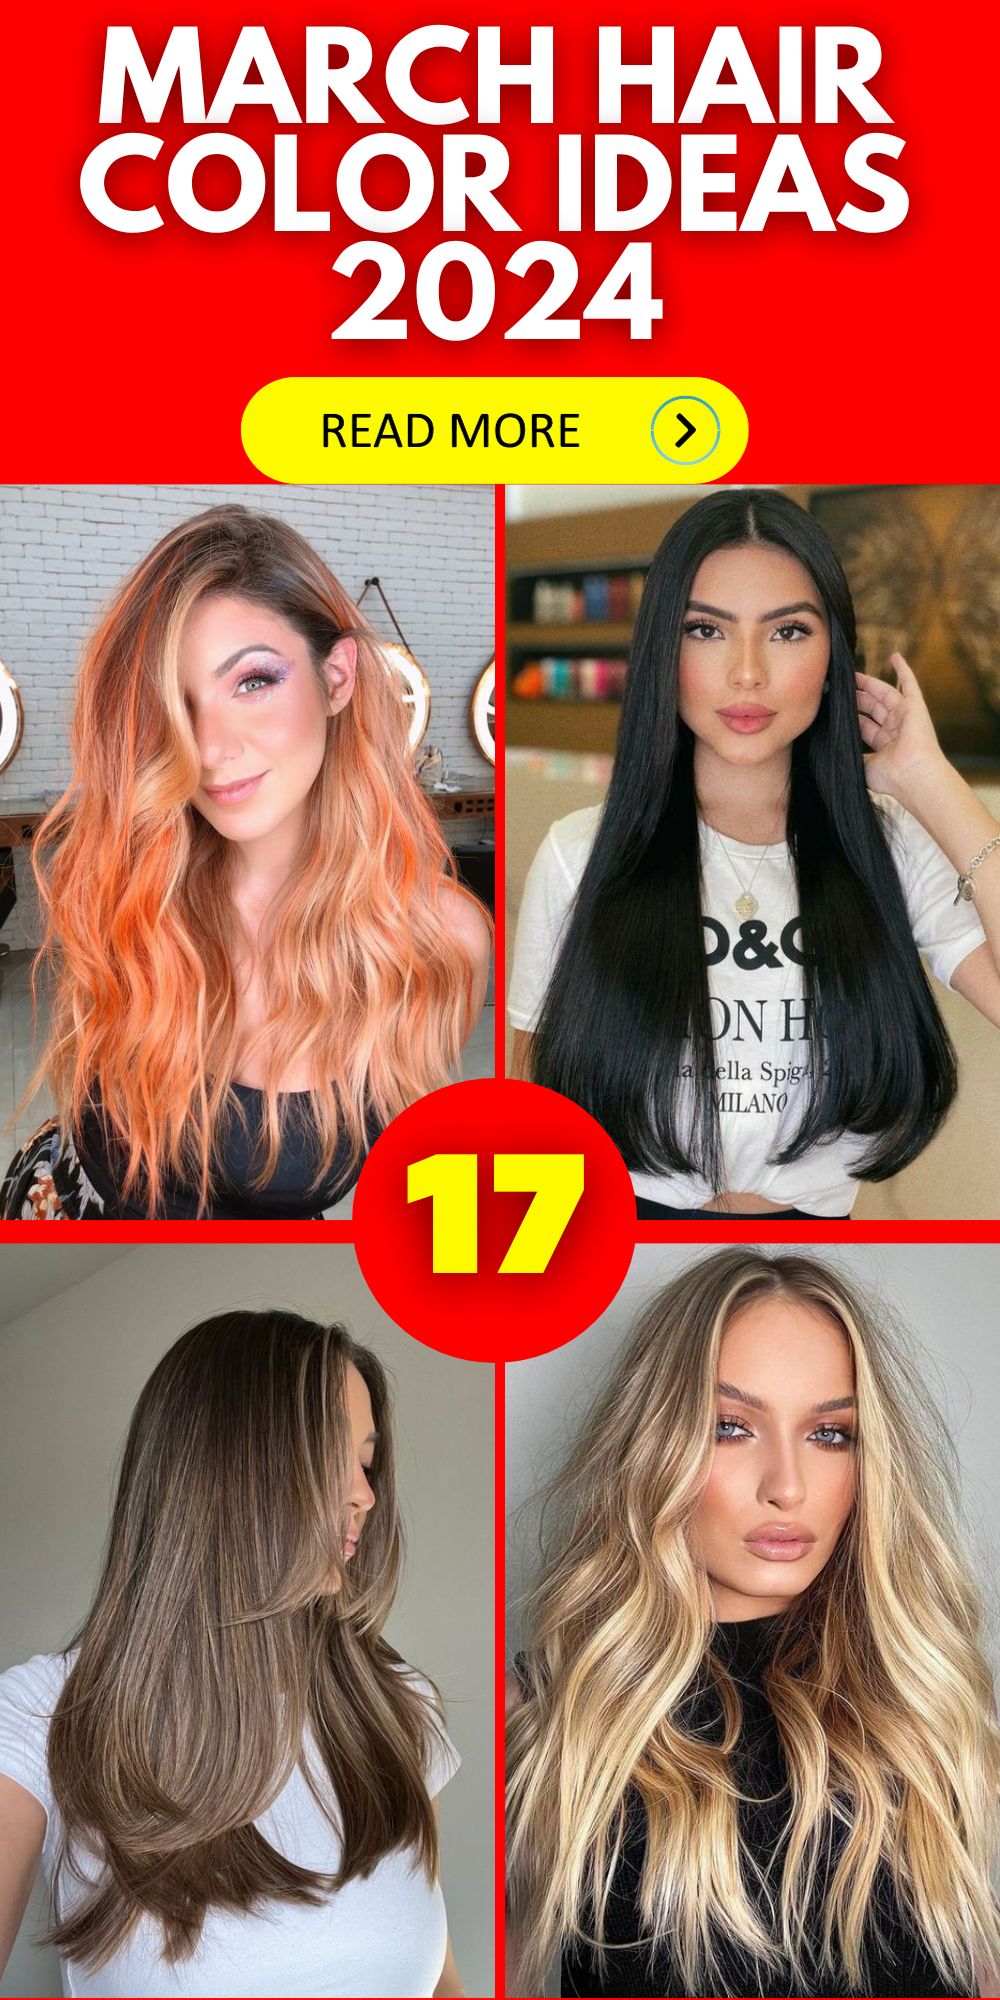 Embrace Spring 2024 with Trending Hair Colors for a Fresh Look